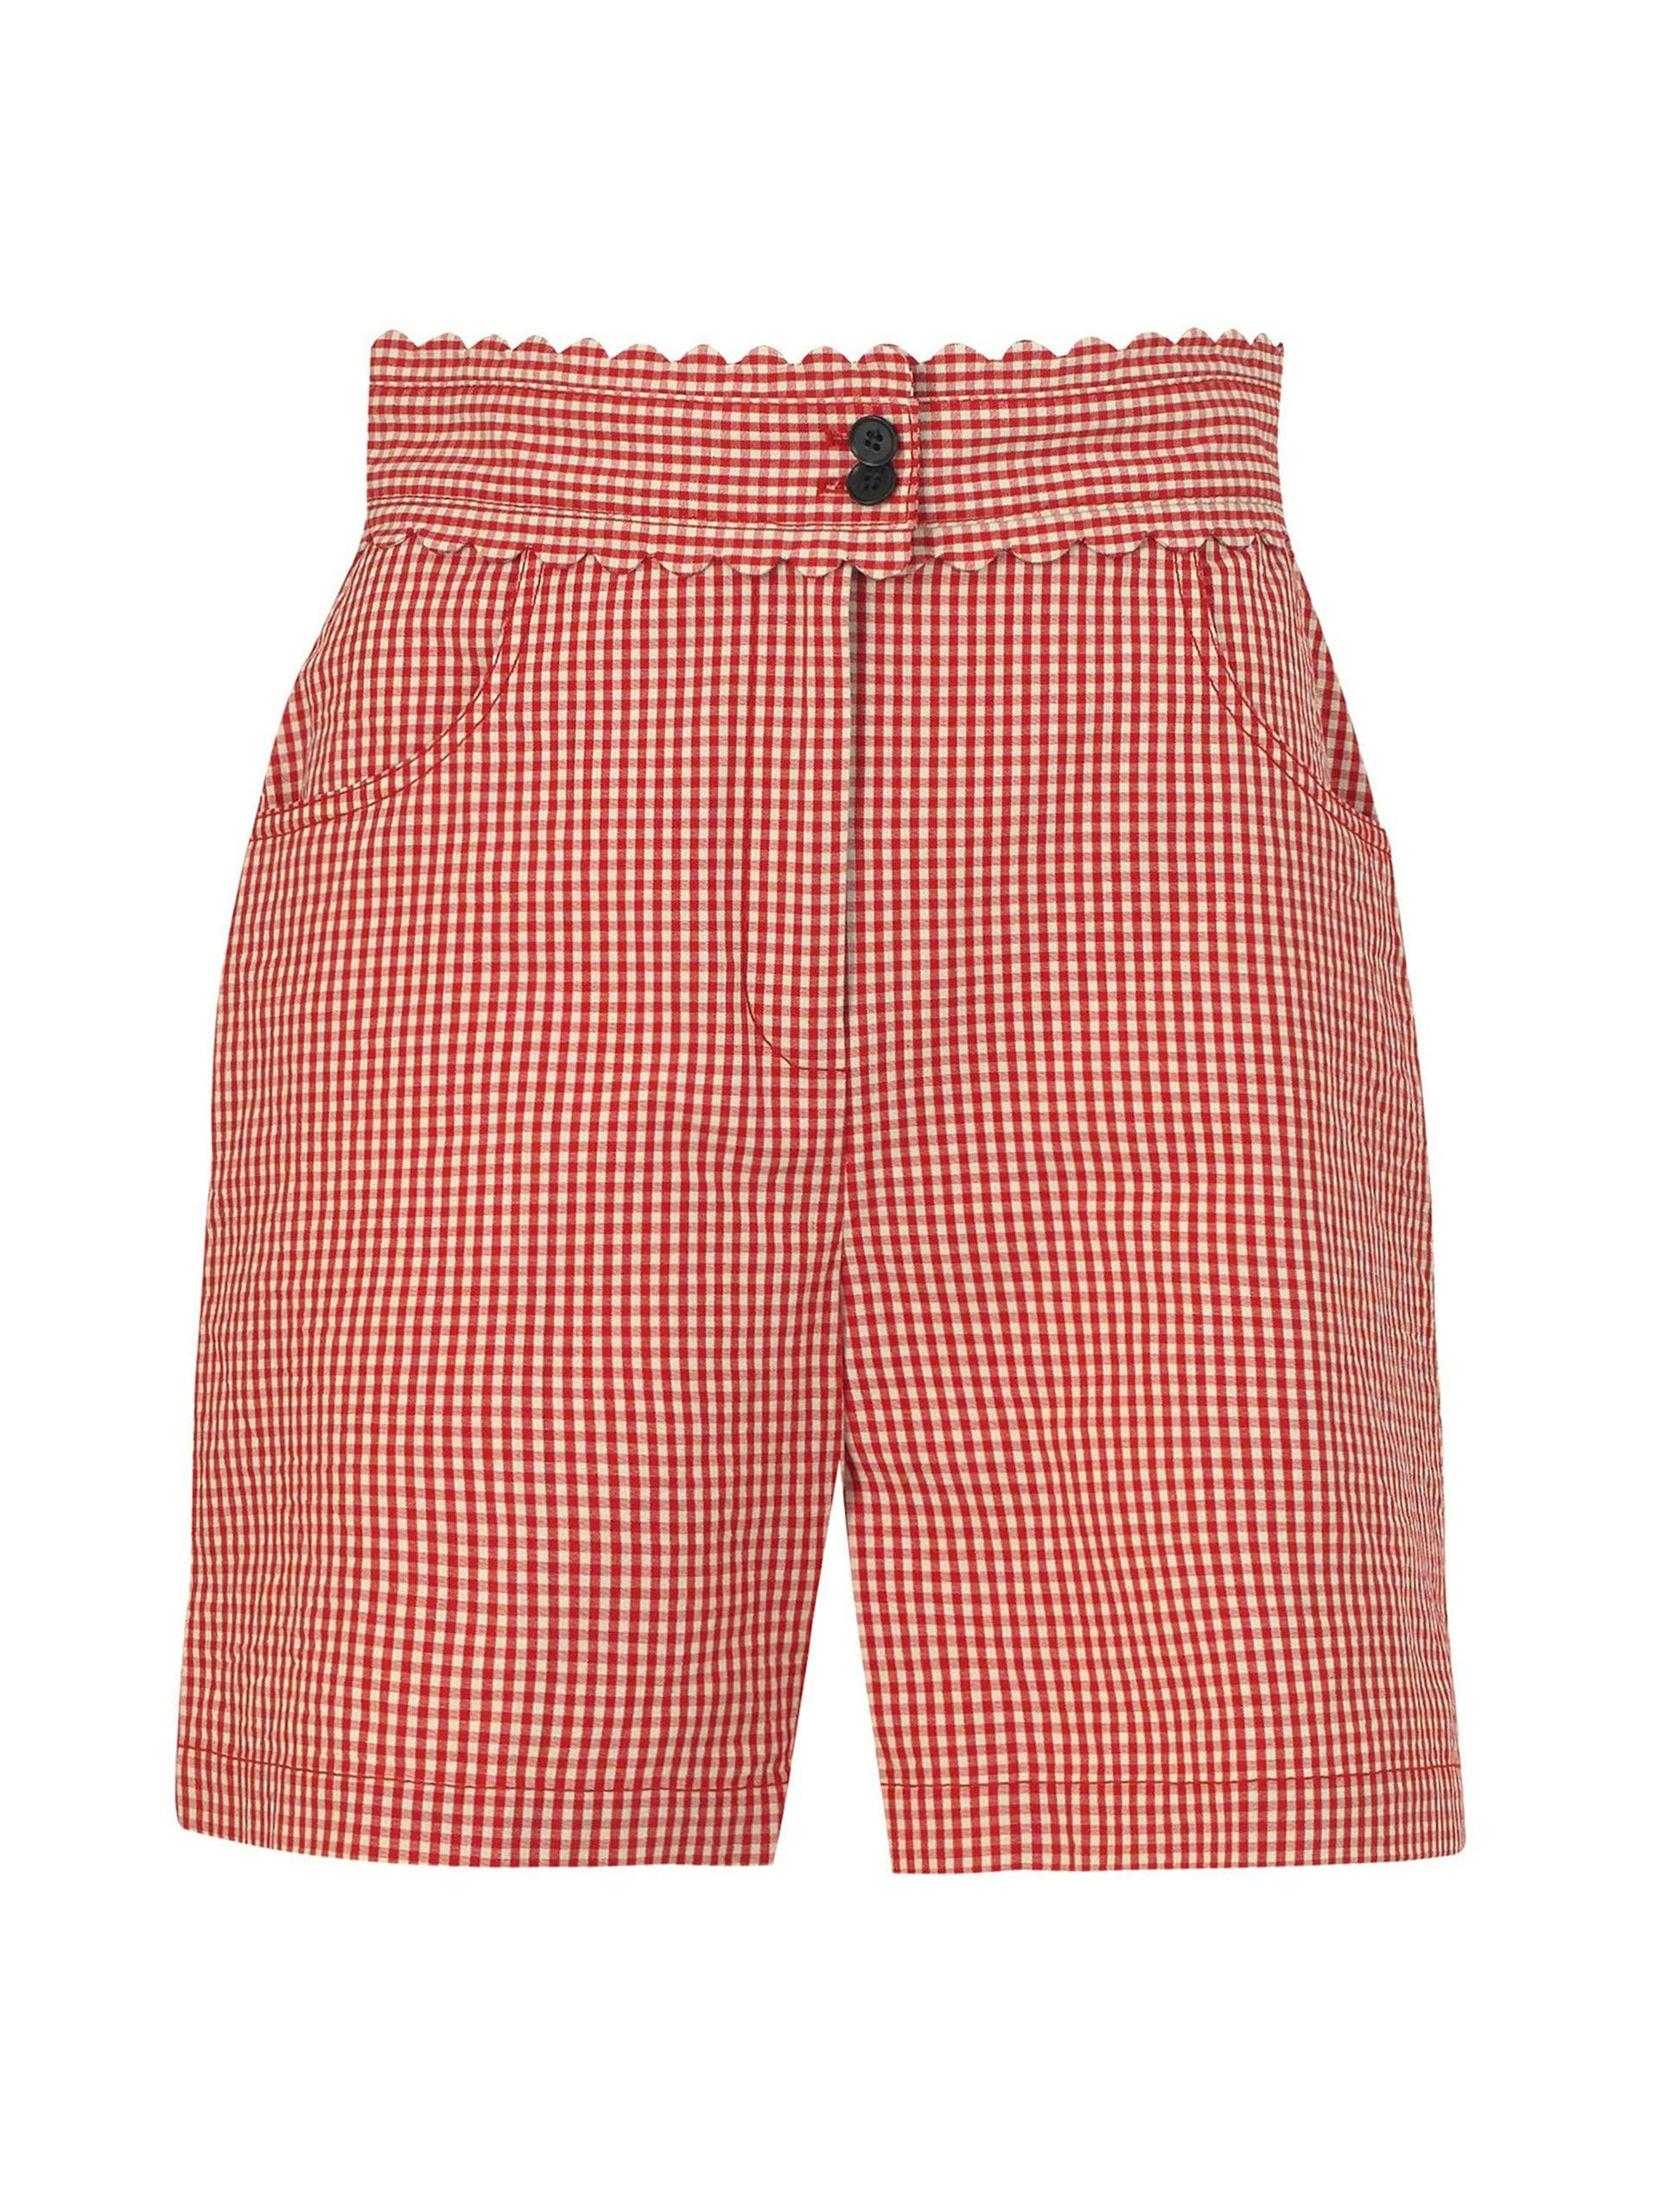 Red and white scalloped gingham shorts